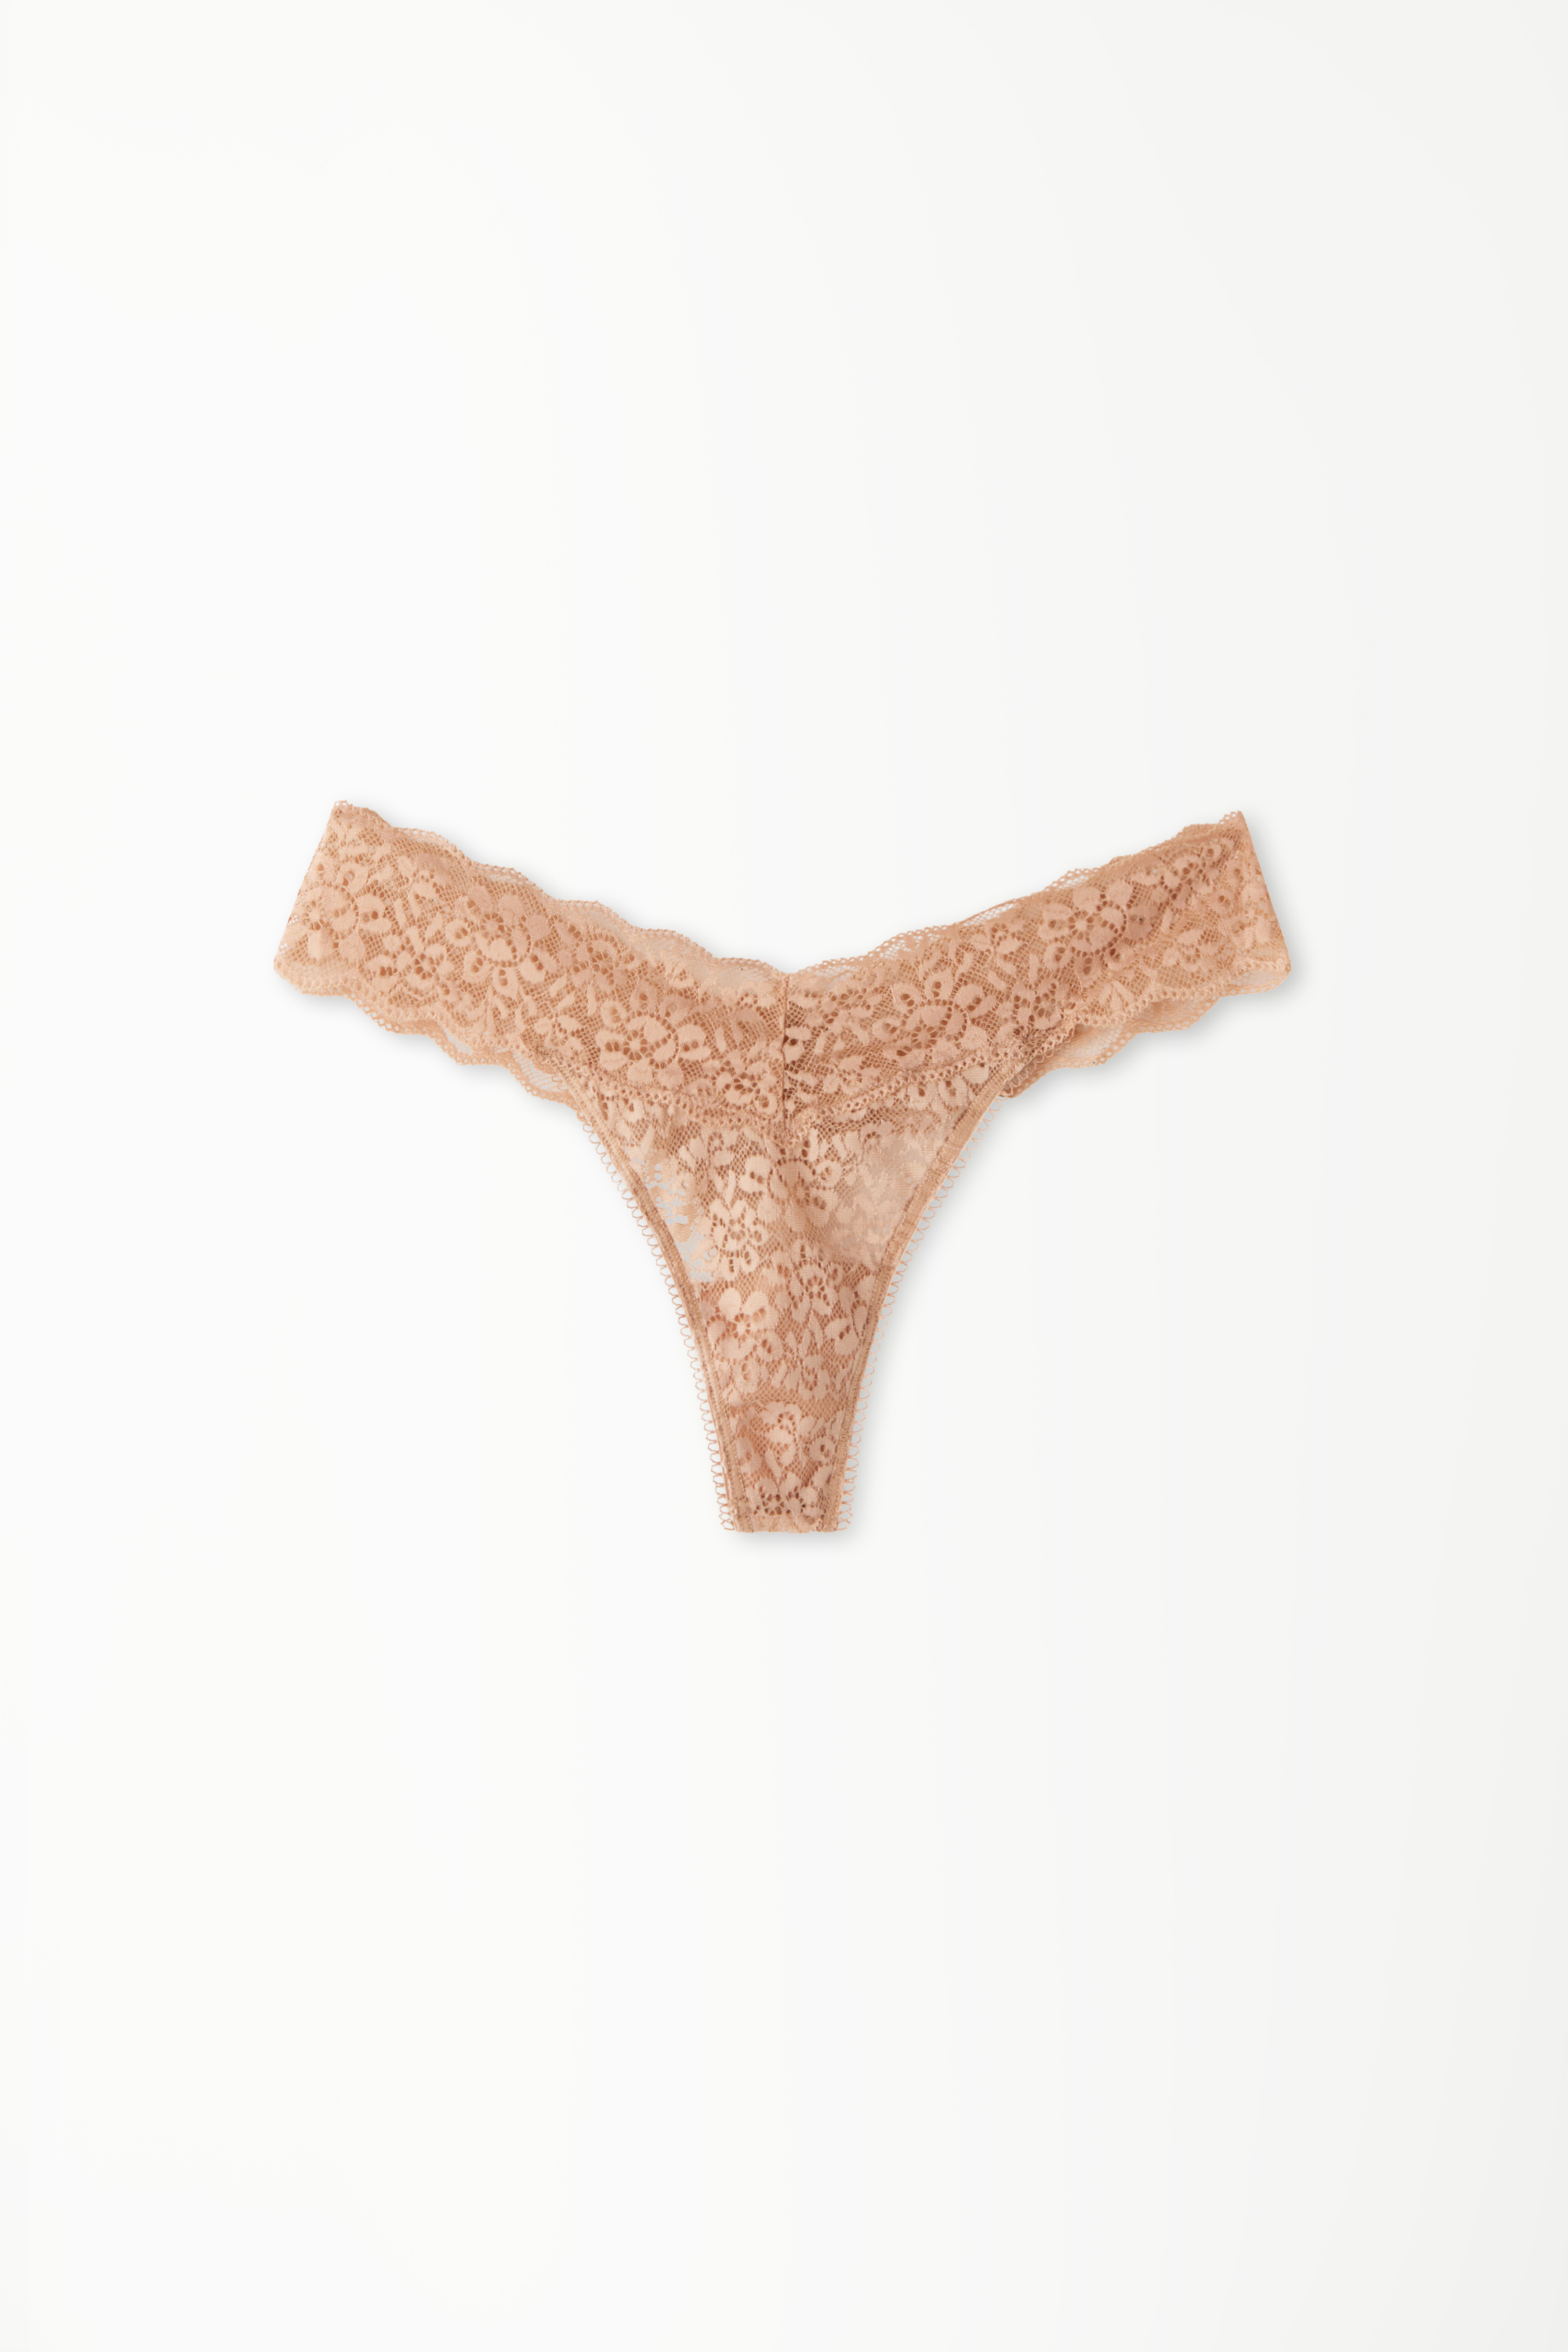 Recycled Lace High-Cut Thong